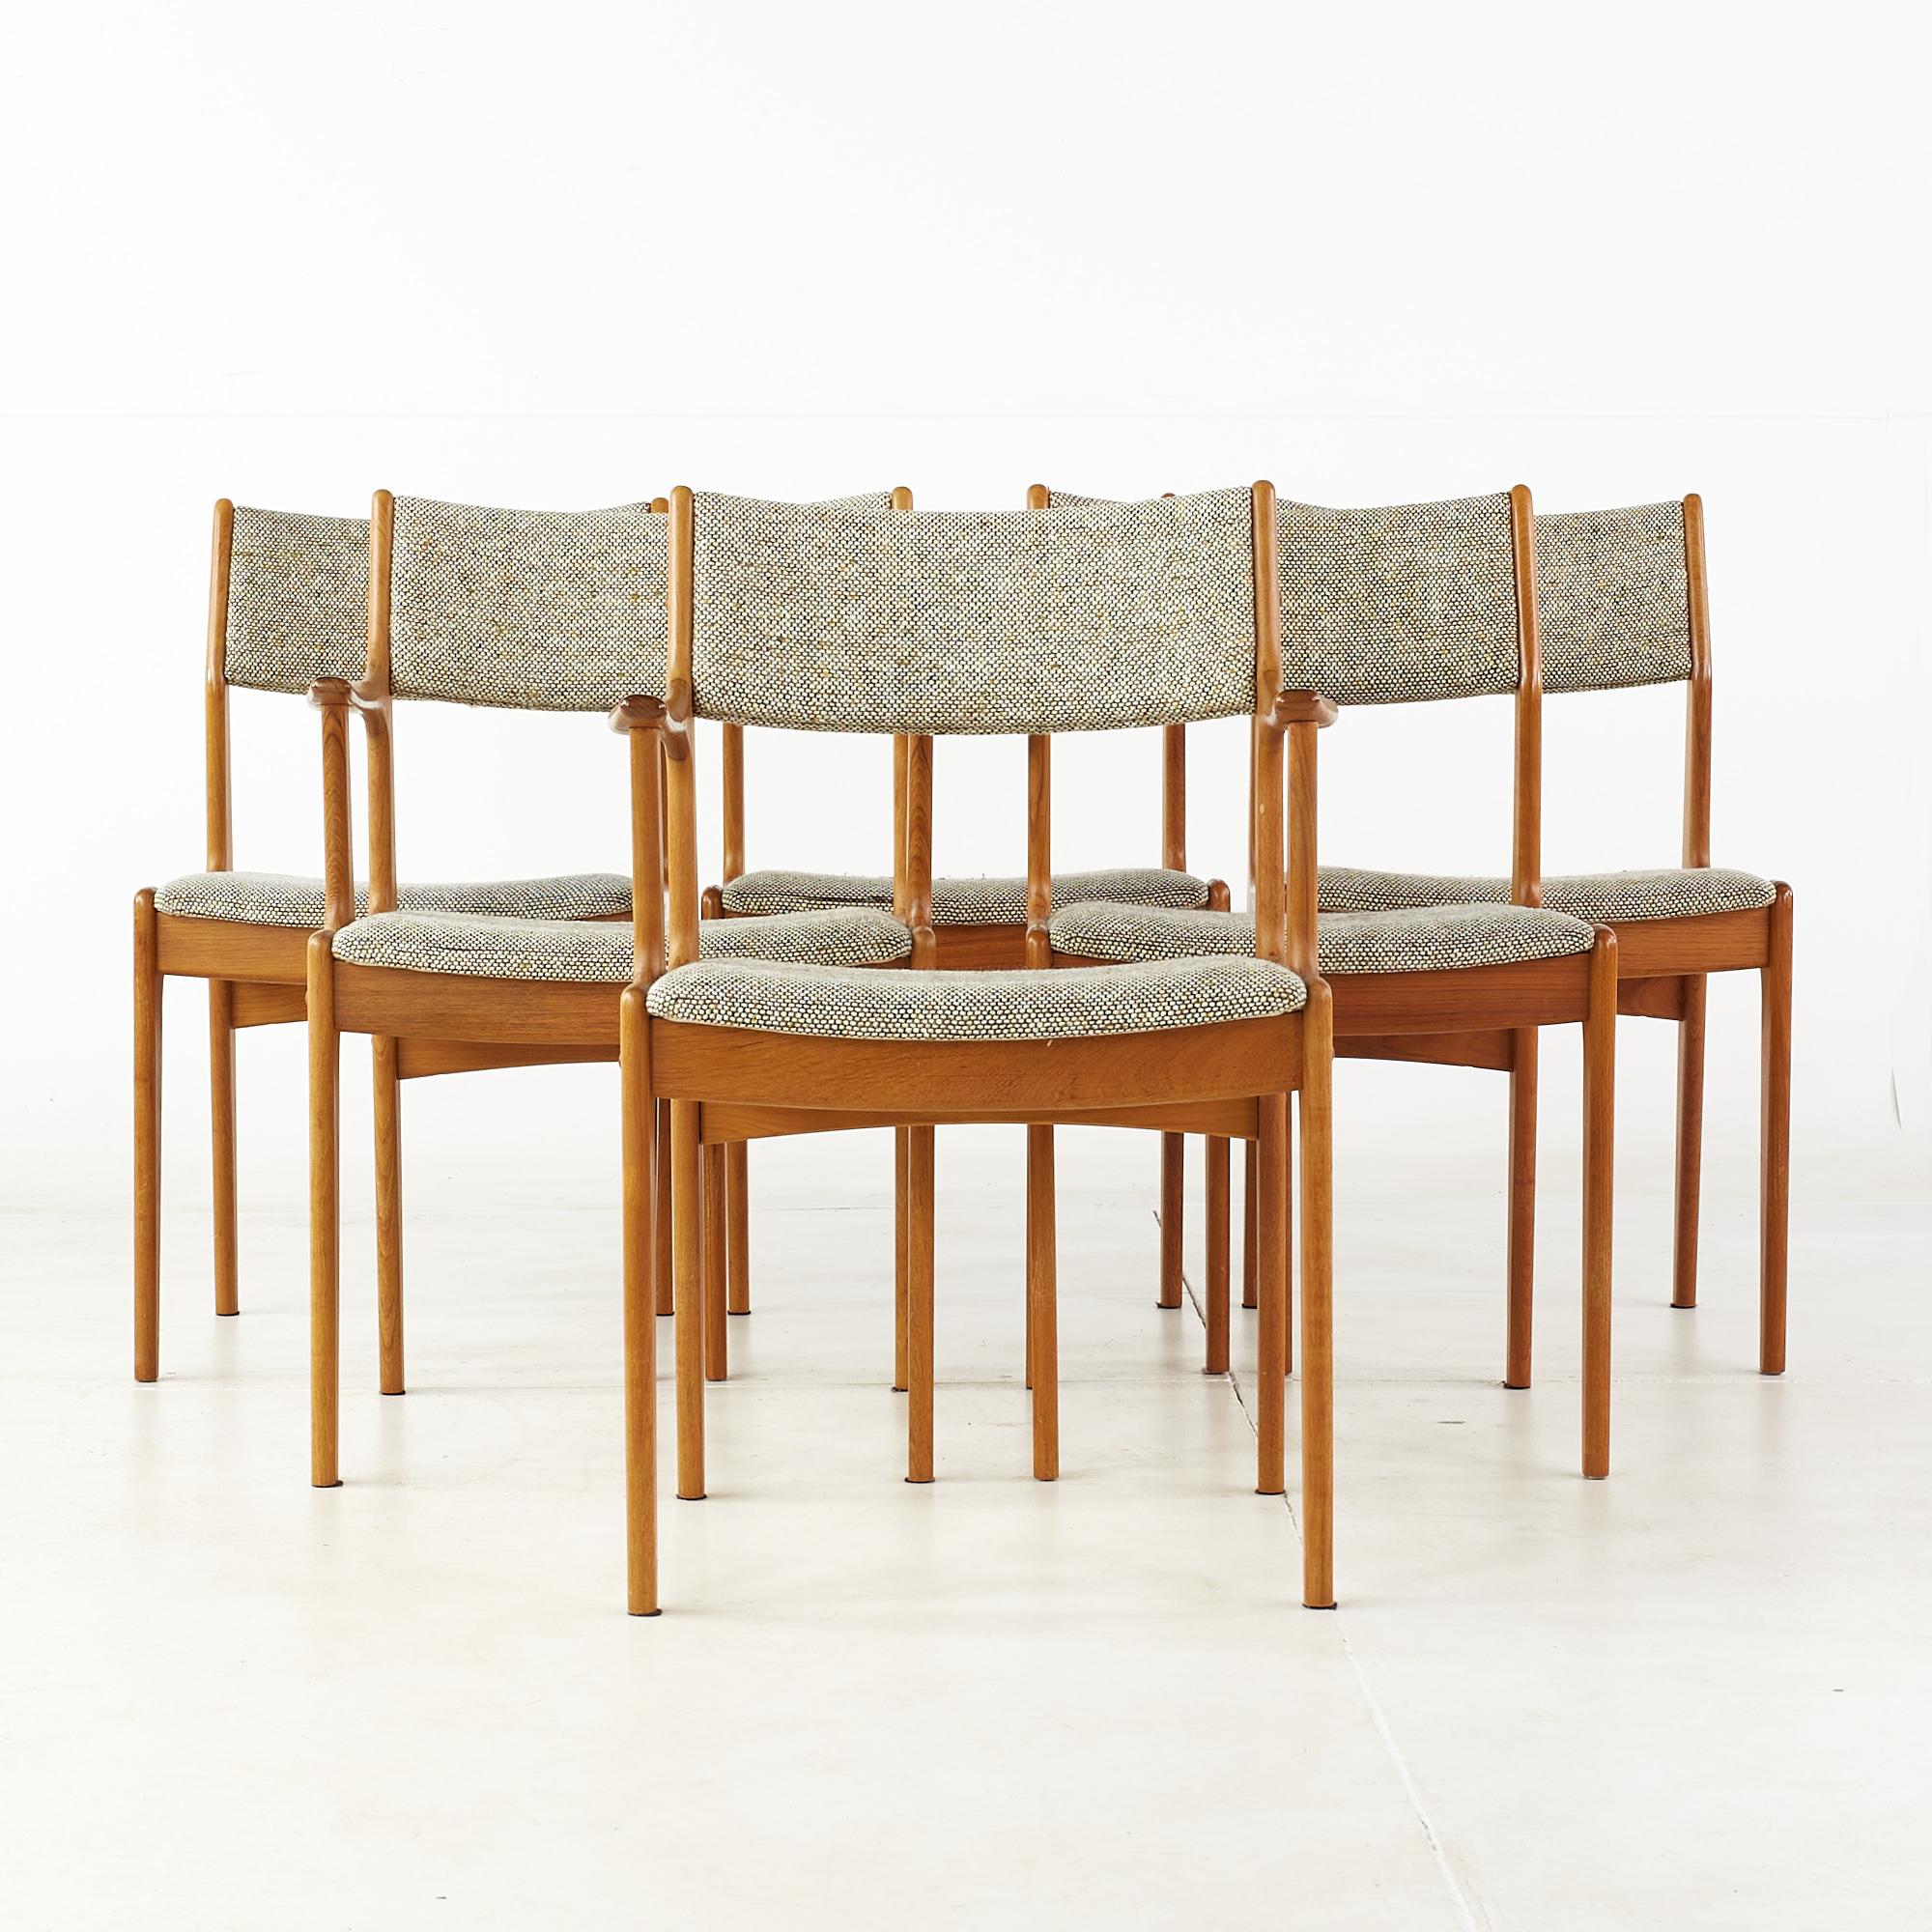 Erik Buch style mid century teak dining chairs - set of 6

Each armless chair measures: 19.5 wide x 18.5 deep x 32.5 high, with a seat height of 18 inches
Each captains chair measures: 22.5 wide x 19 deep x 32.5 high, with a seat height of 18